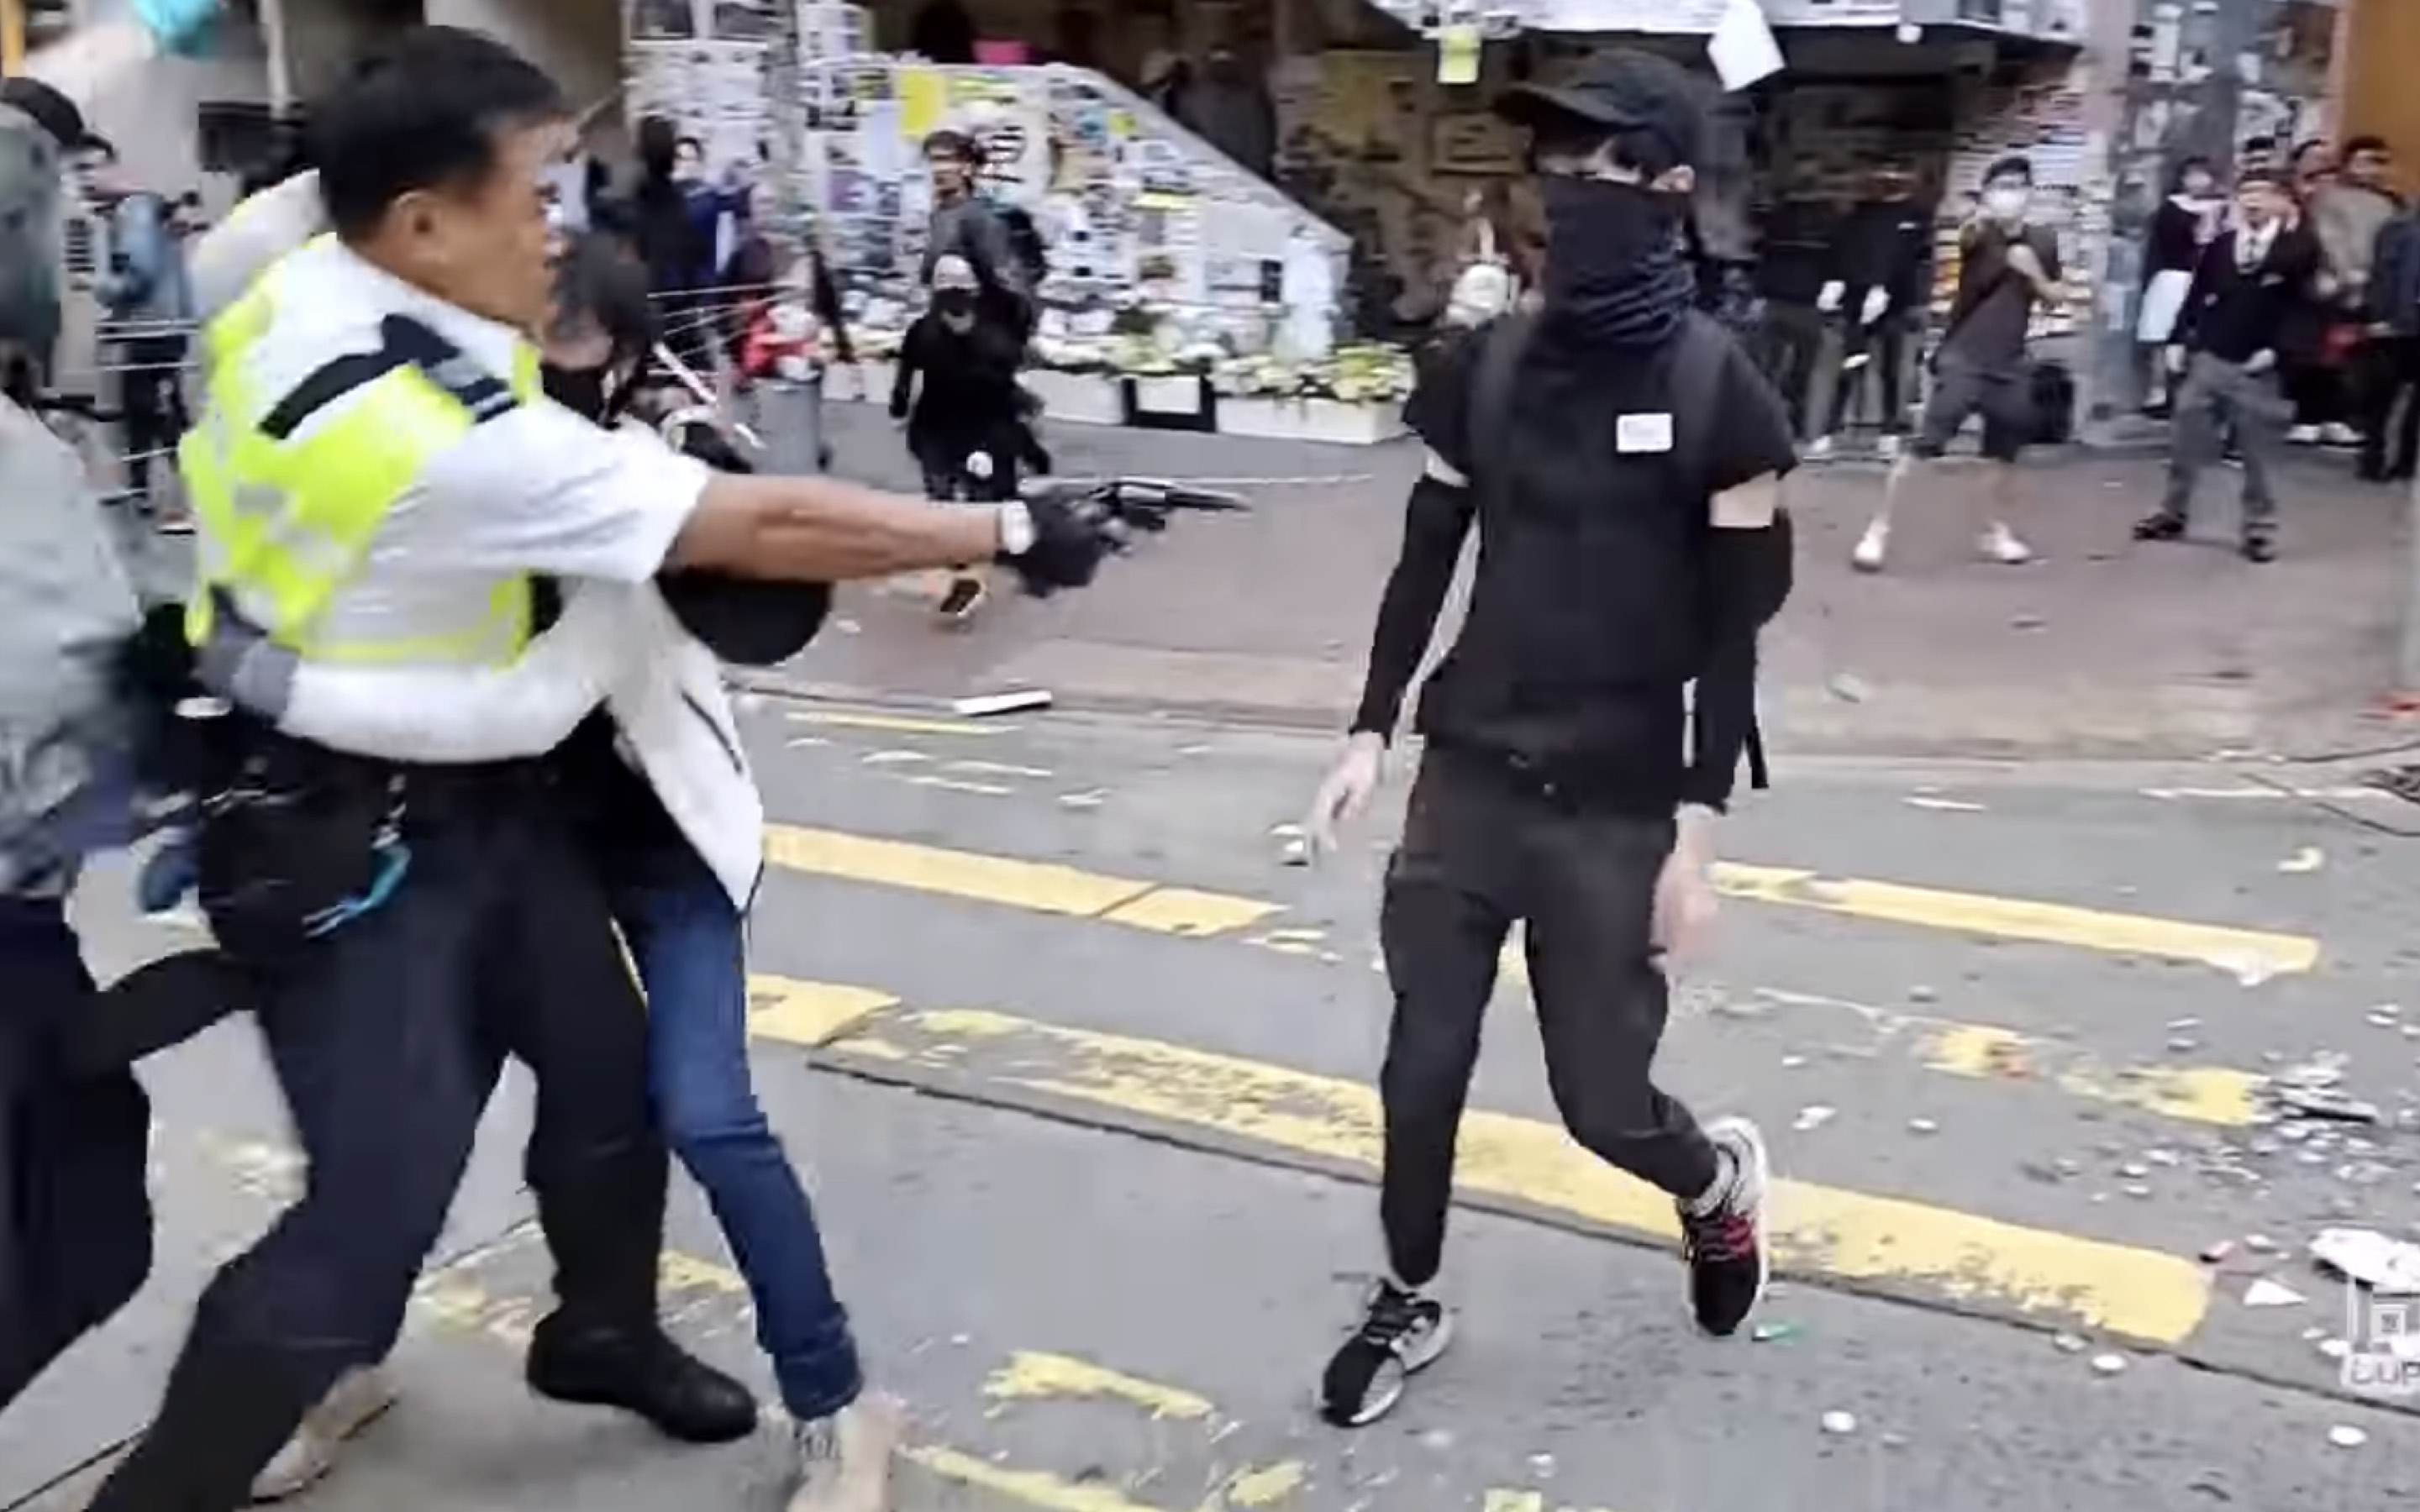 The moment a police officer shot a 21-year-old protester in the abdomen. Screengrab via YouTube.